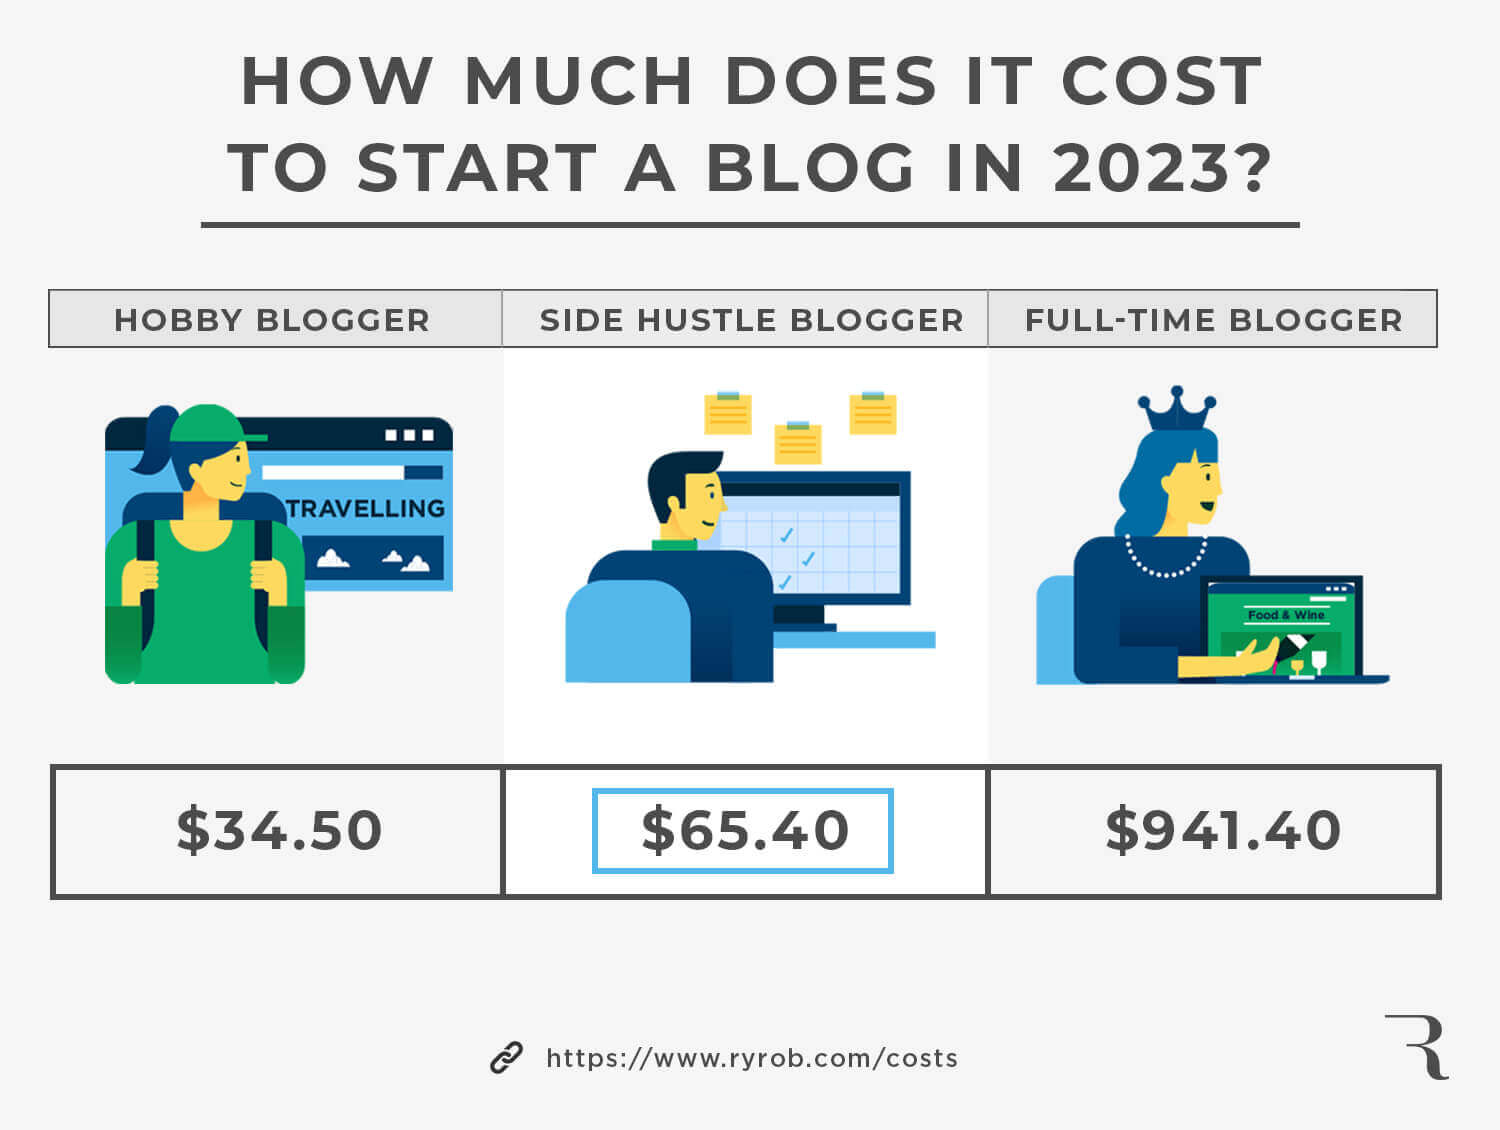 How Much Does it Cost to Start a Blog This Year Graphic for Bloggers (Optimized)